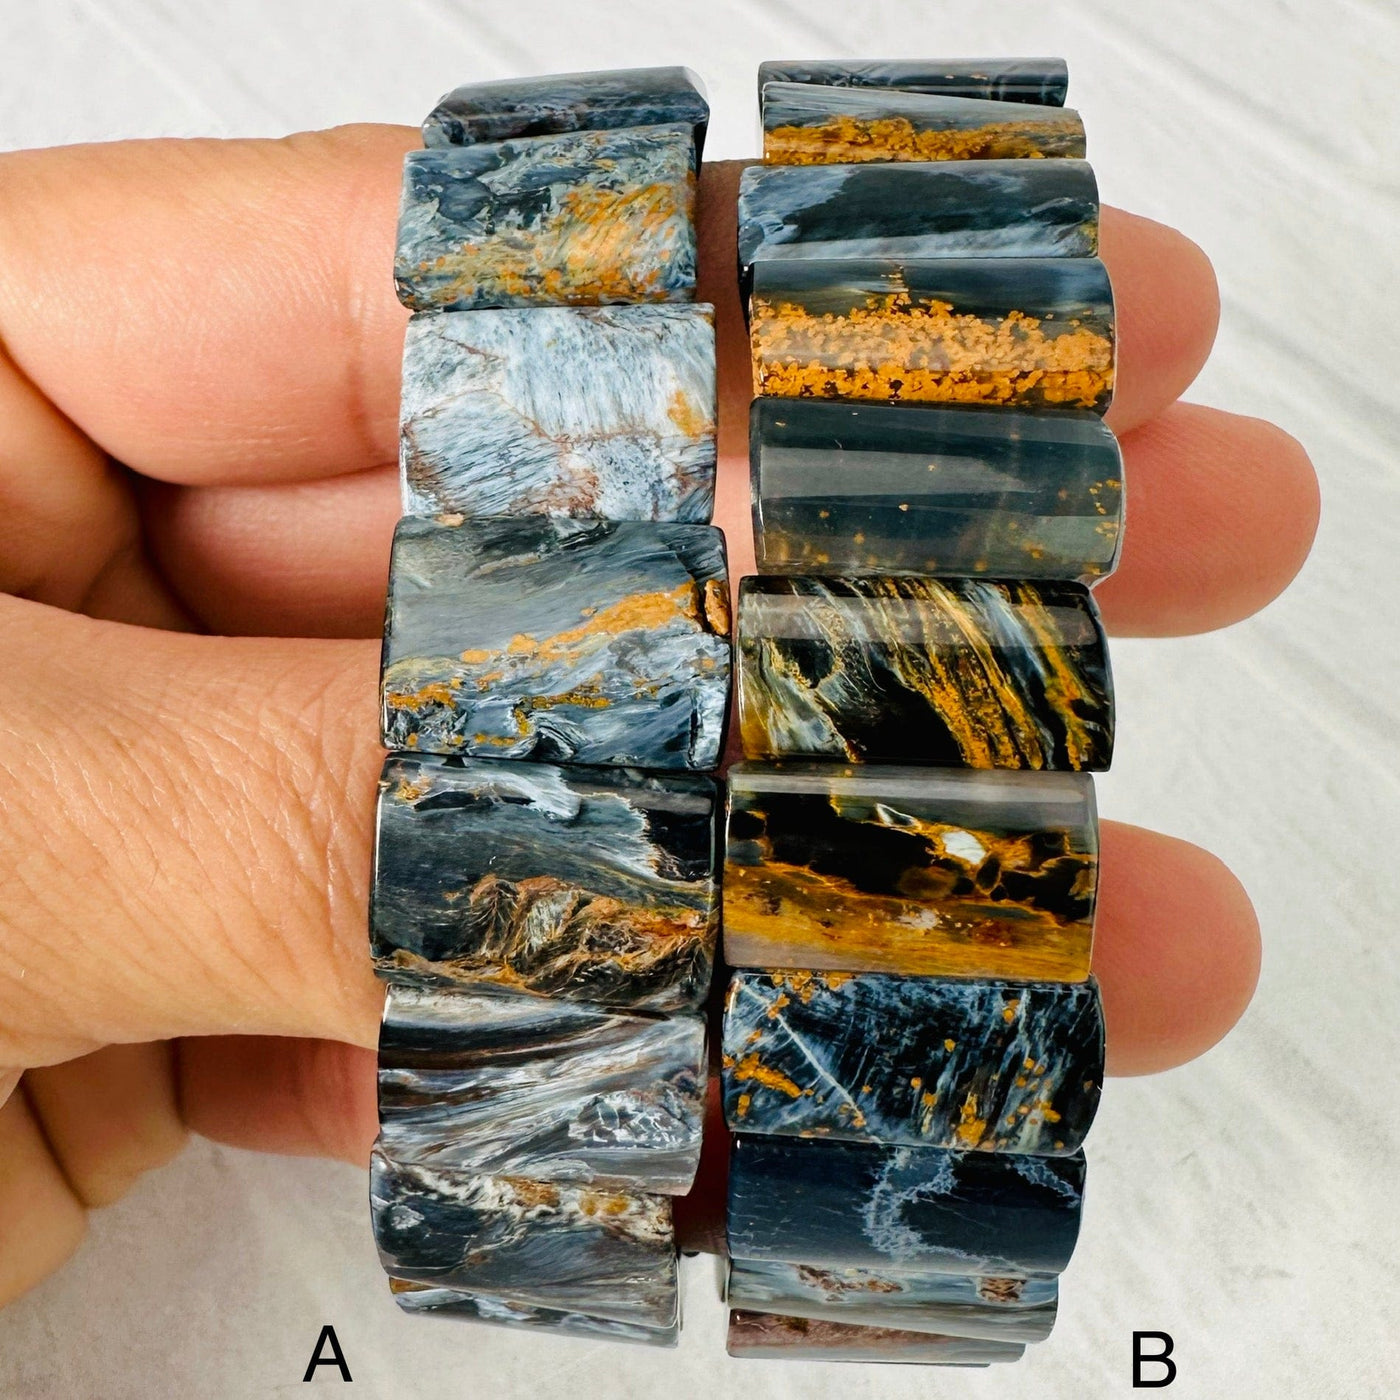 Up close view of Blue Pietersite Rectangle Bead Bracelets side by side over woman's fingers. Respective letters on lower part of picture next to the bracelet they represent.